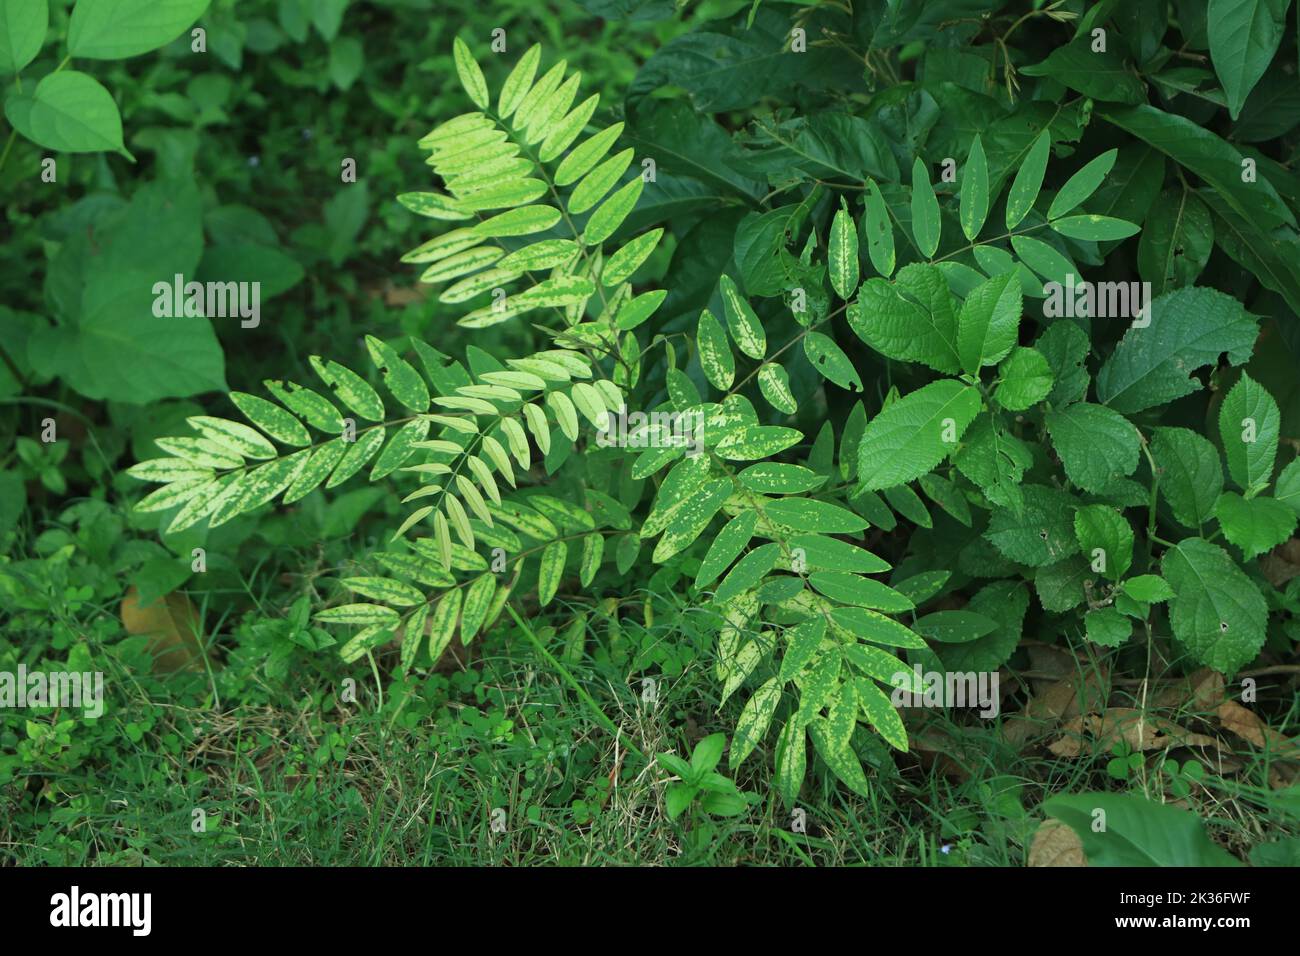 Closeup green leaves background, Overlay fresh leaf pattern, Natural foliage textured and background Stock Photo